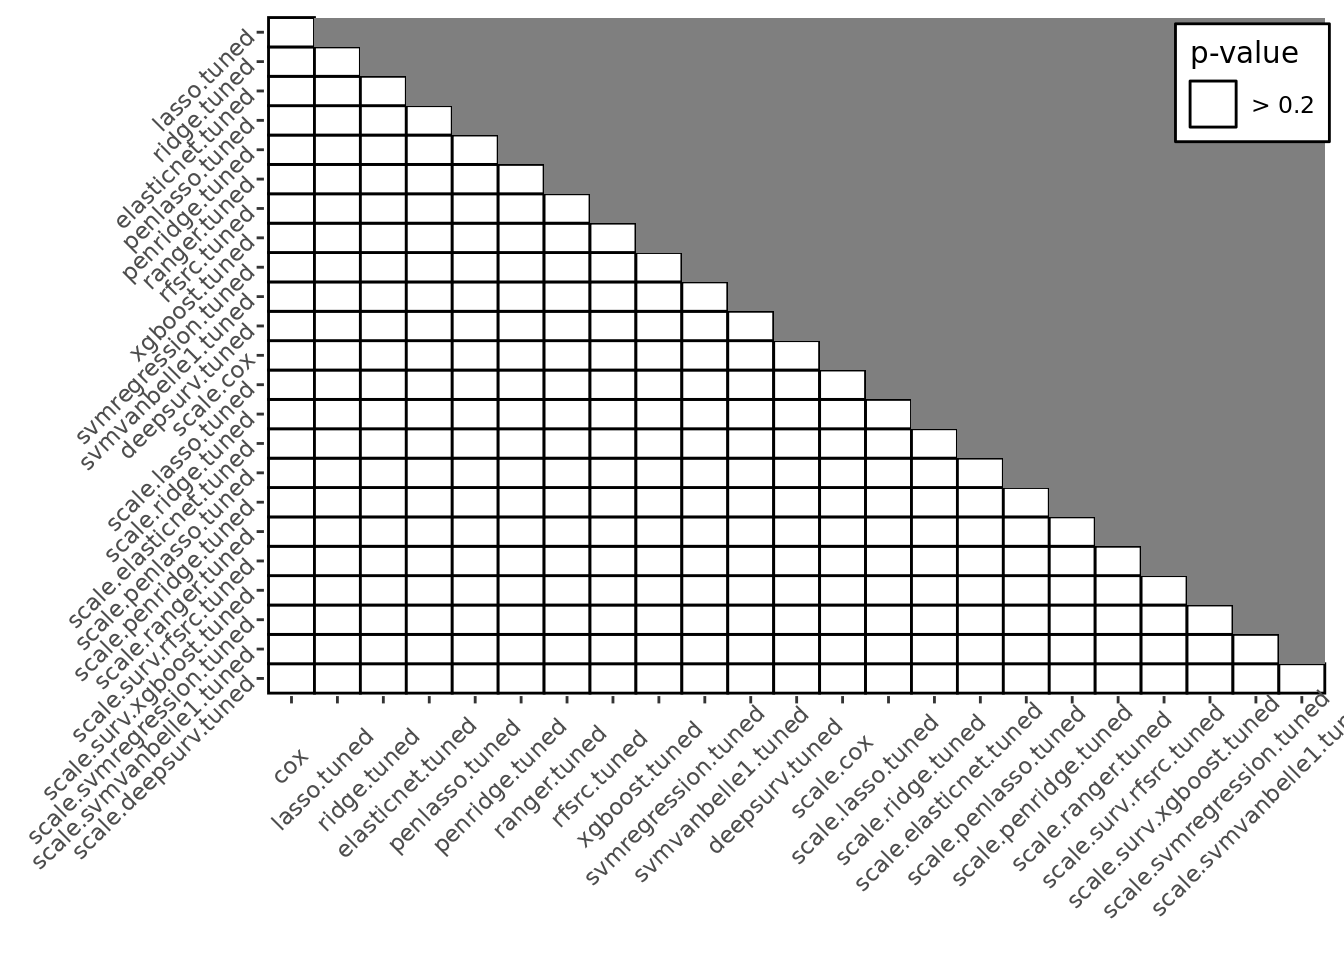 benchmarks_aggr_pairwise_harrell_c-1.png